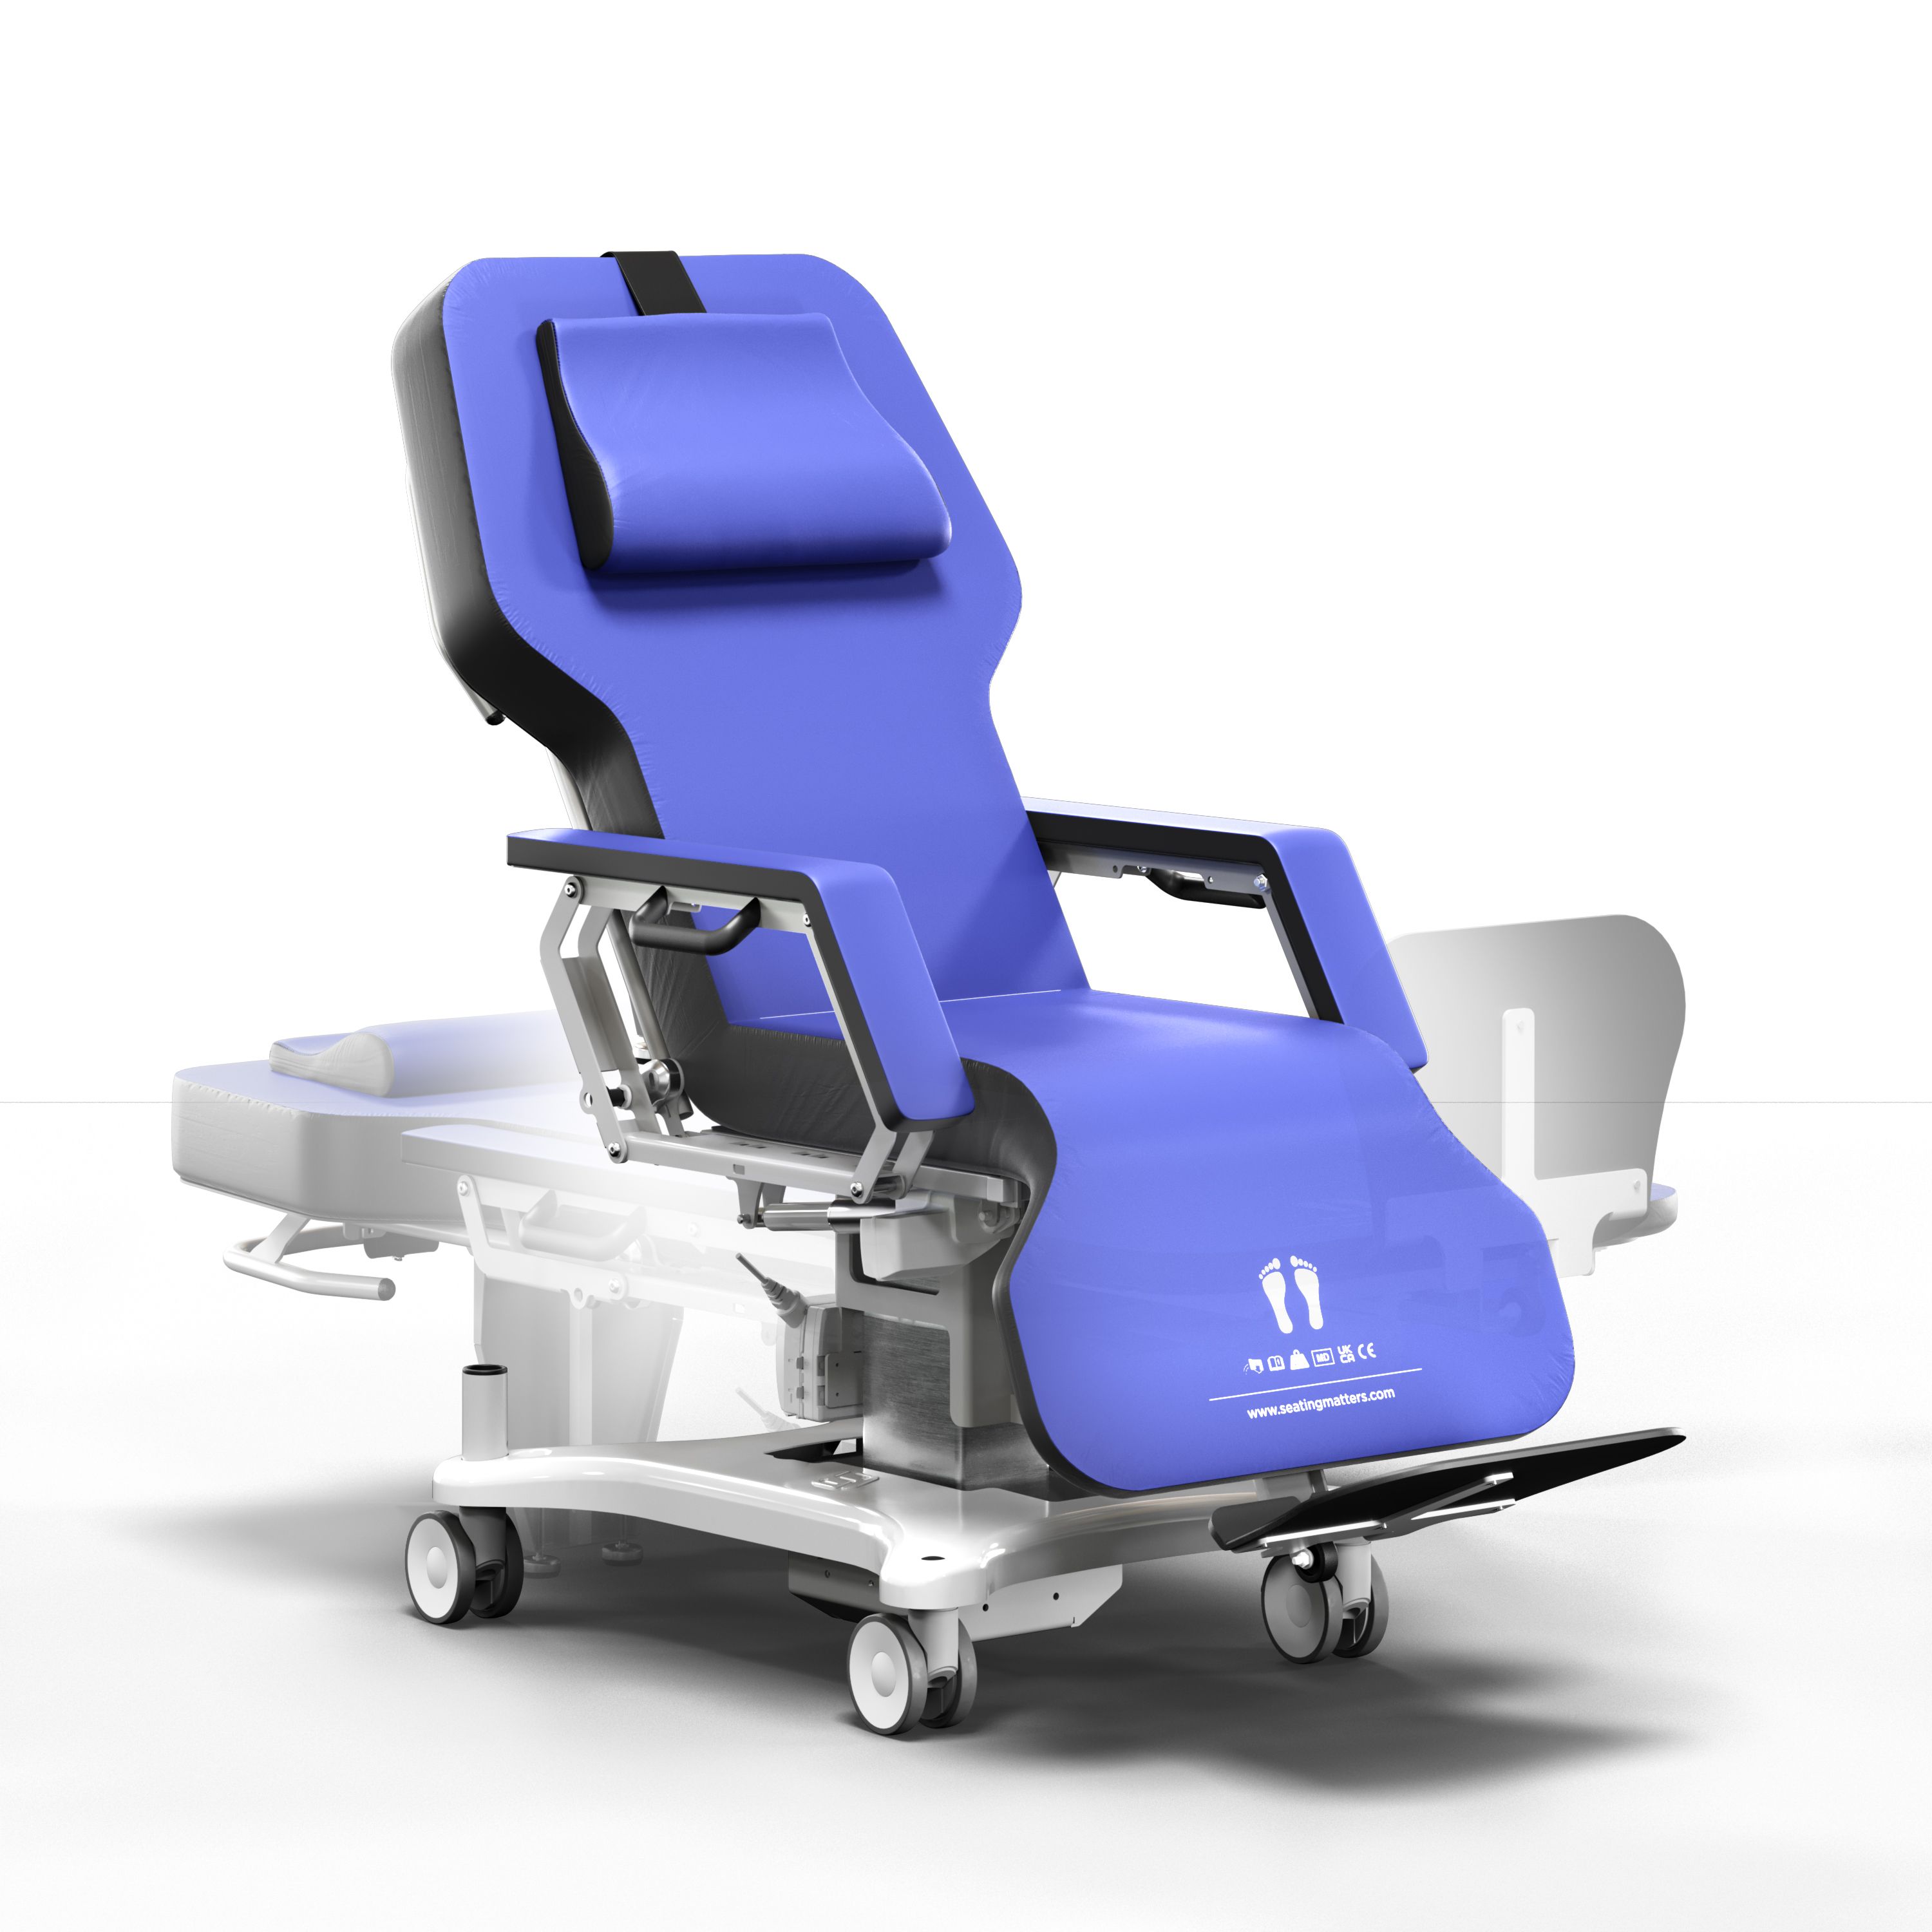 SEATING MATTERS TO UNVEIL CHAIR UPGRADES AND SHOWCASE THE SYDNEY GOFLAT™ AT THE OT SHOW 2022